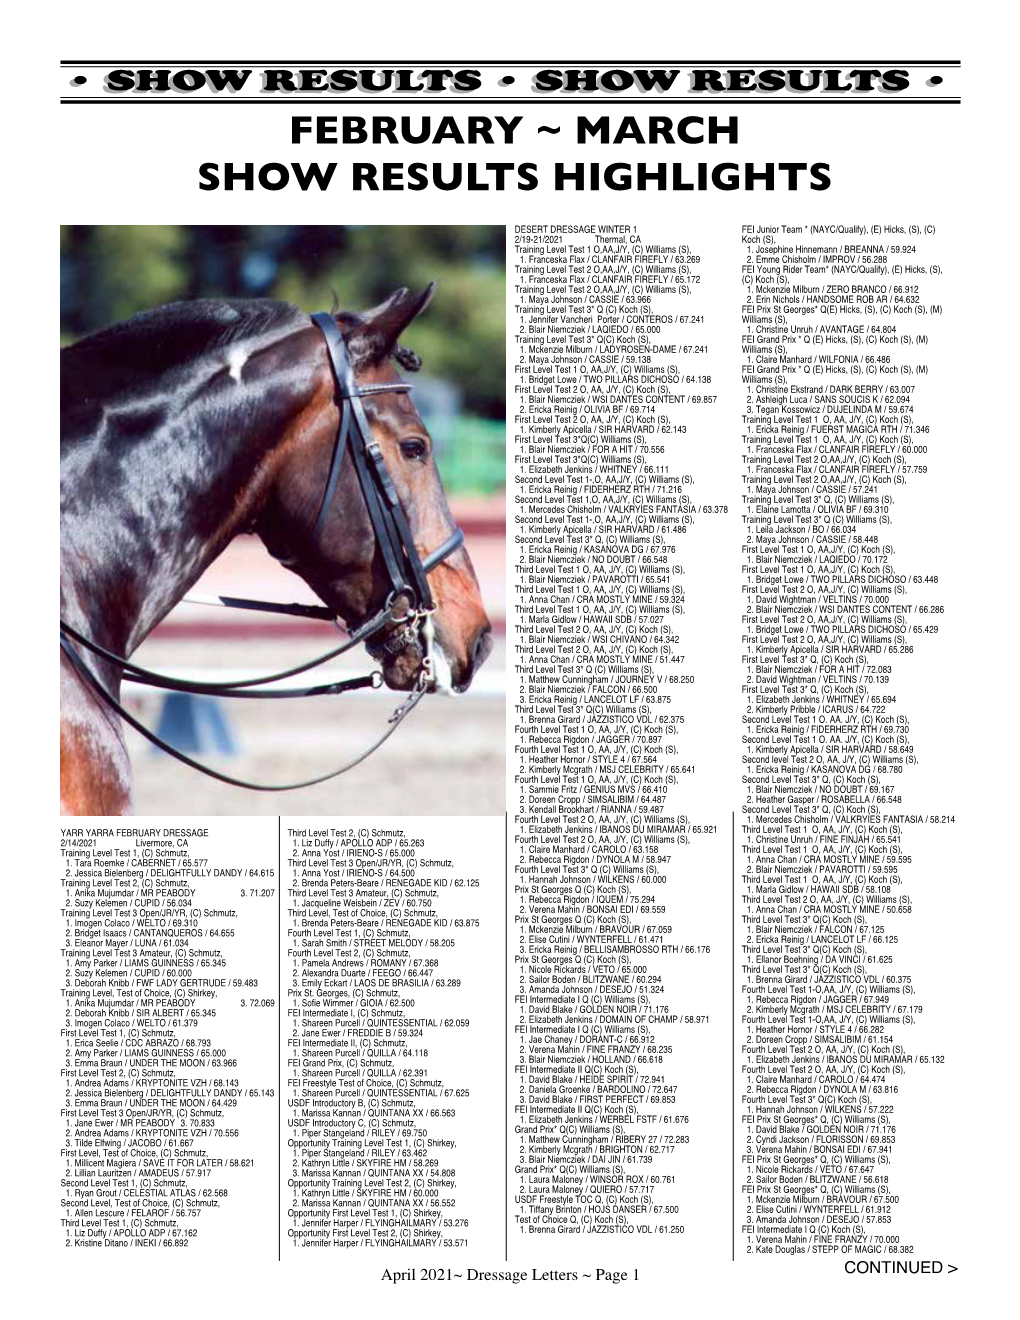 February ~ March Show Results Highlights